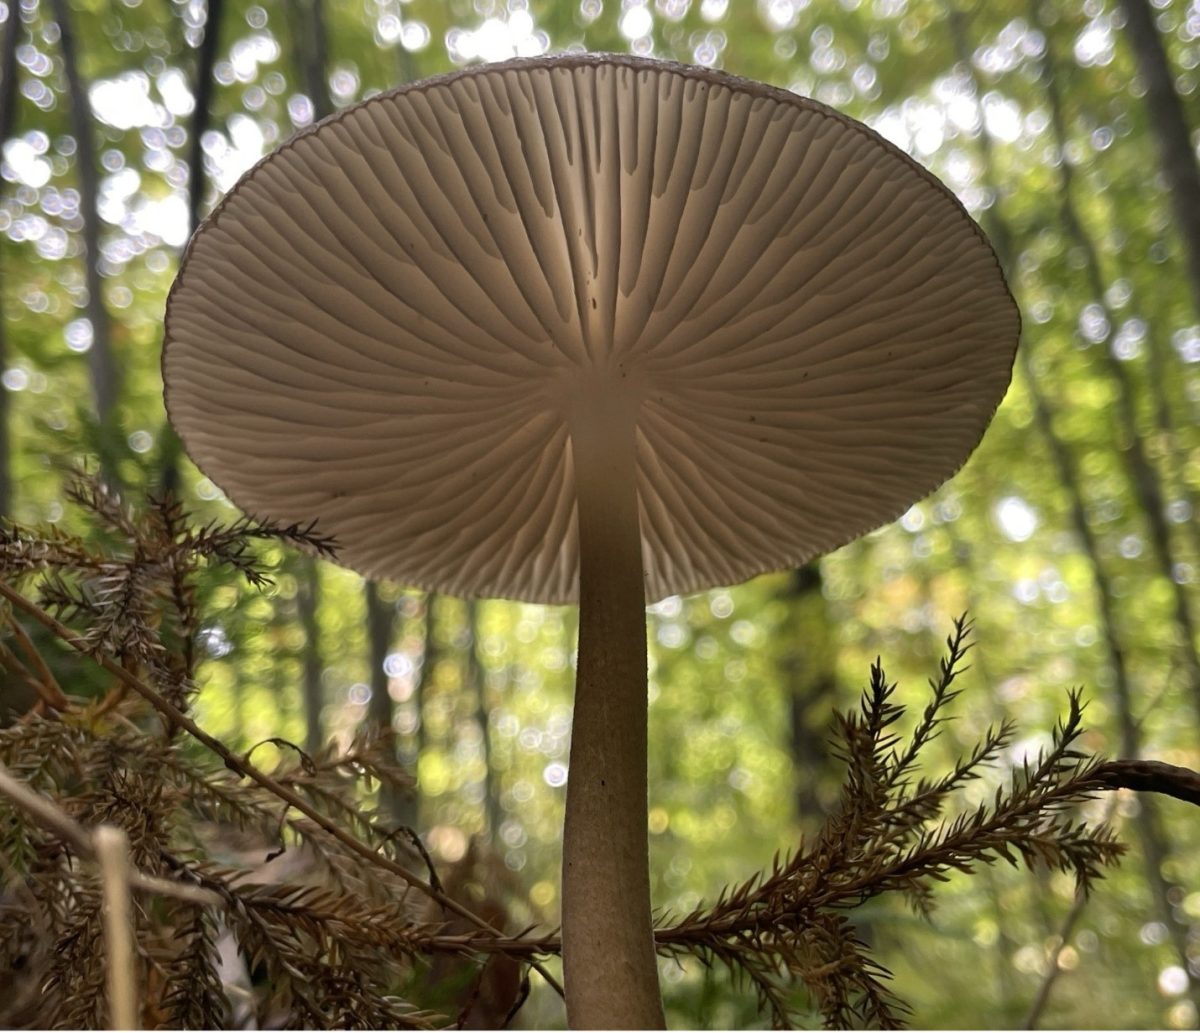 Dark+radiating+gills+from+a+Beech+Rooter+mushroom+contrast+against+the+glowing+cap+caused+by+rays+of+light+that+shining+through+the+forest+canopy.+